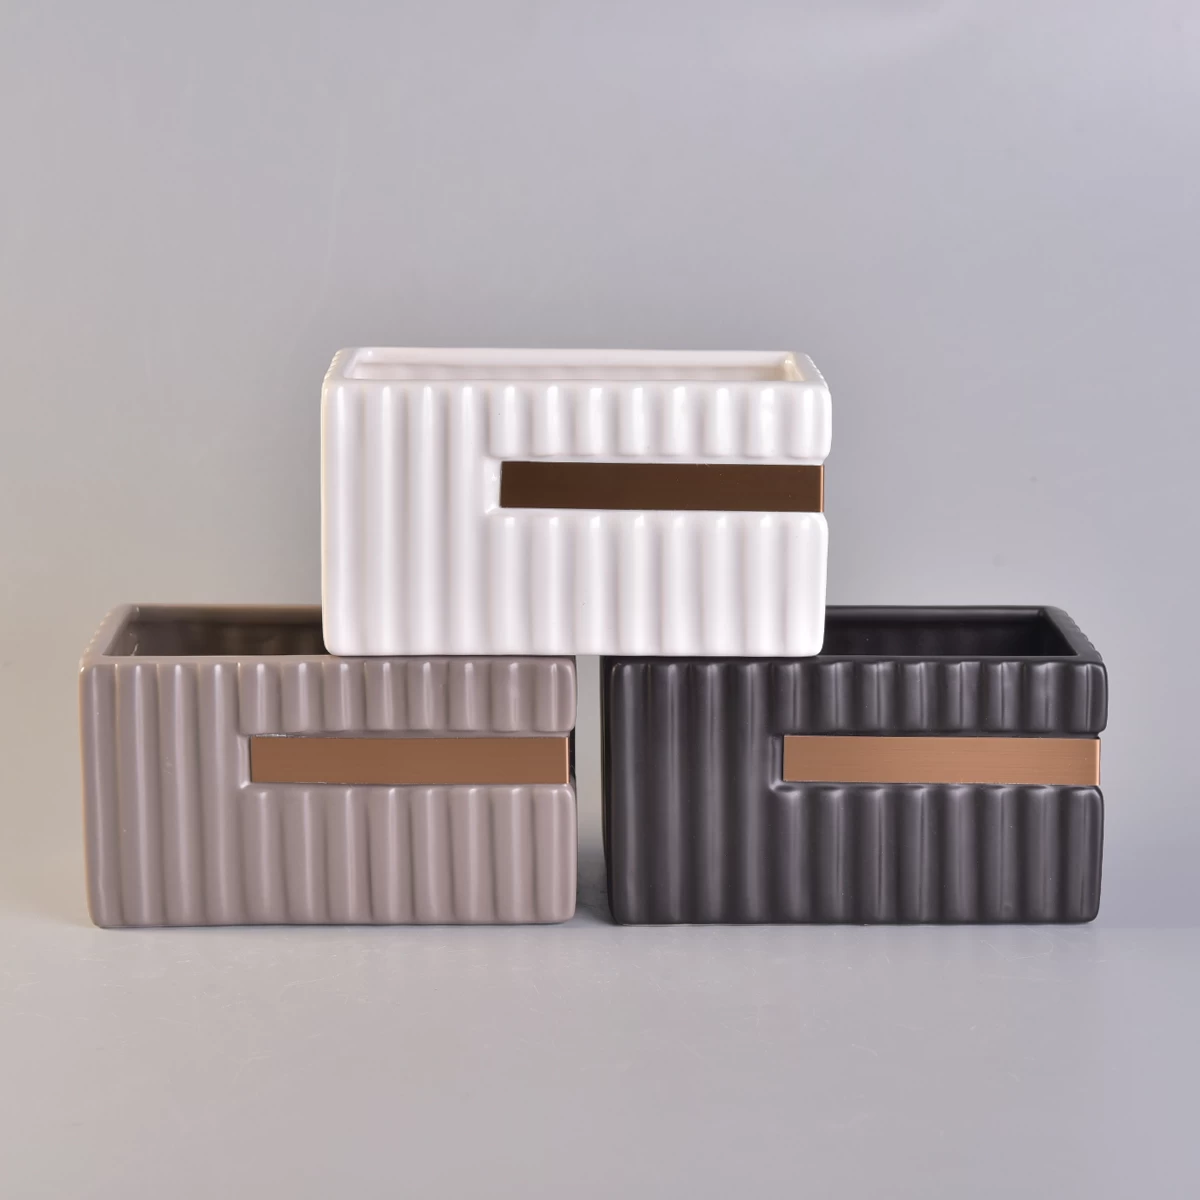 700ml Rectangular Ceramic Candle Holders Stripes Pattern Home Decoration Pieces